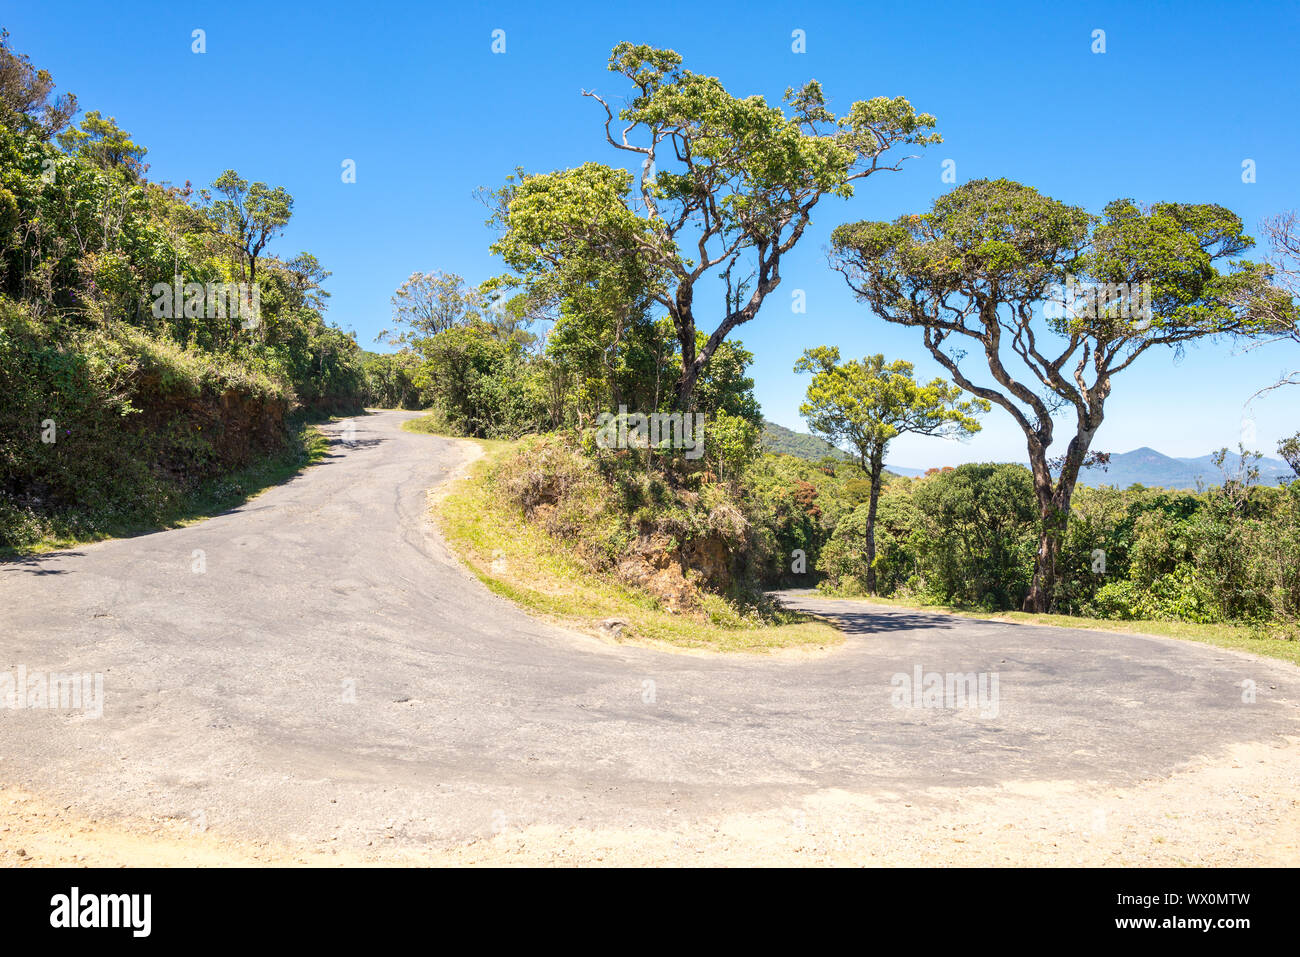 Dry tropical forest and monsoon forest on the way to the Horton Plains in Sri Lanka Stock Photo